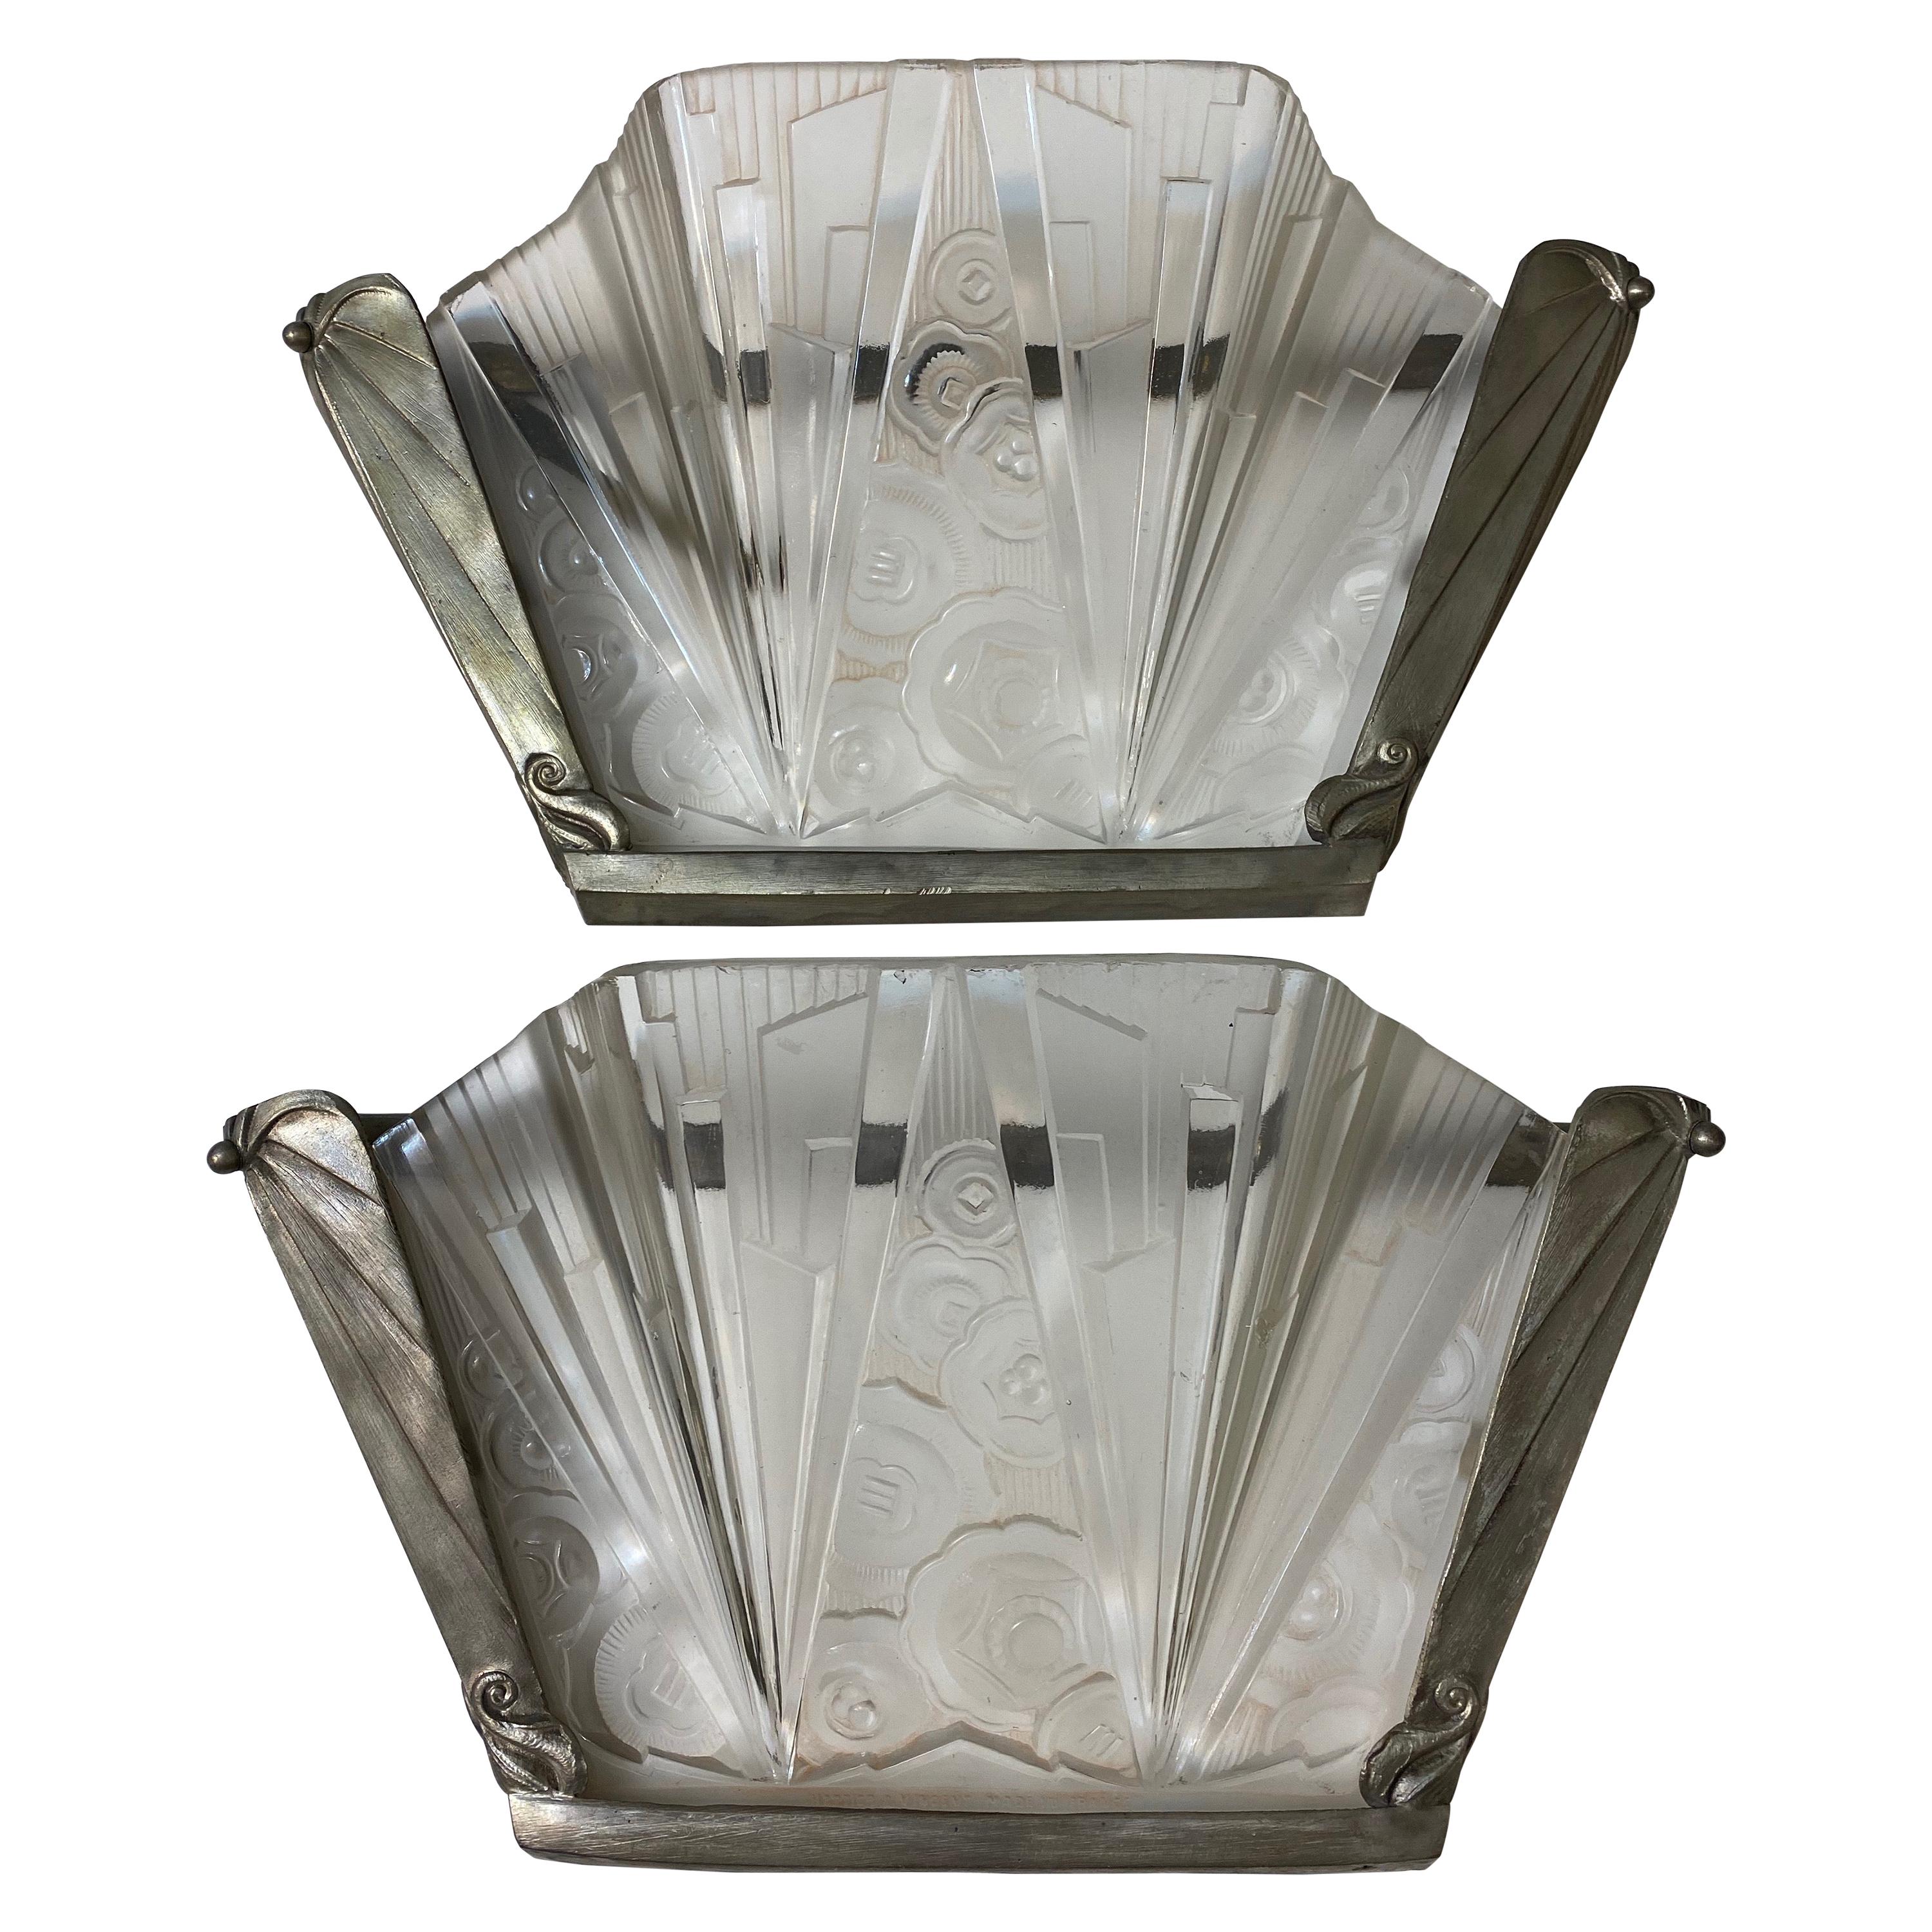 Pair of French Art Deco Wall Sconces Signed by Hettier Vincent For Sale